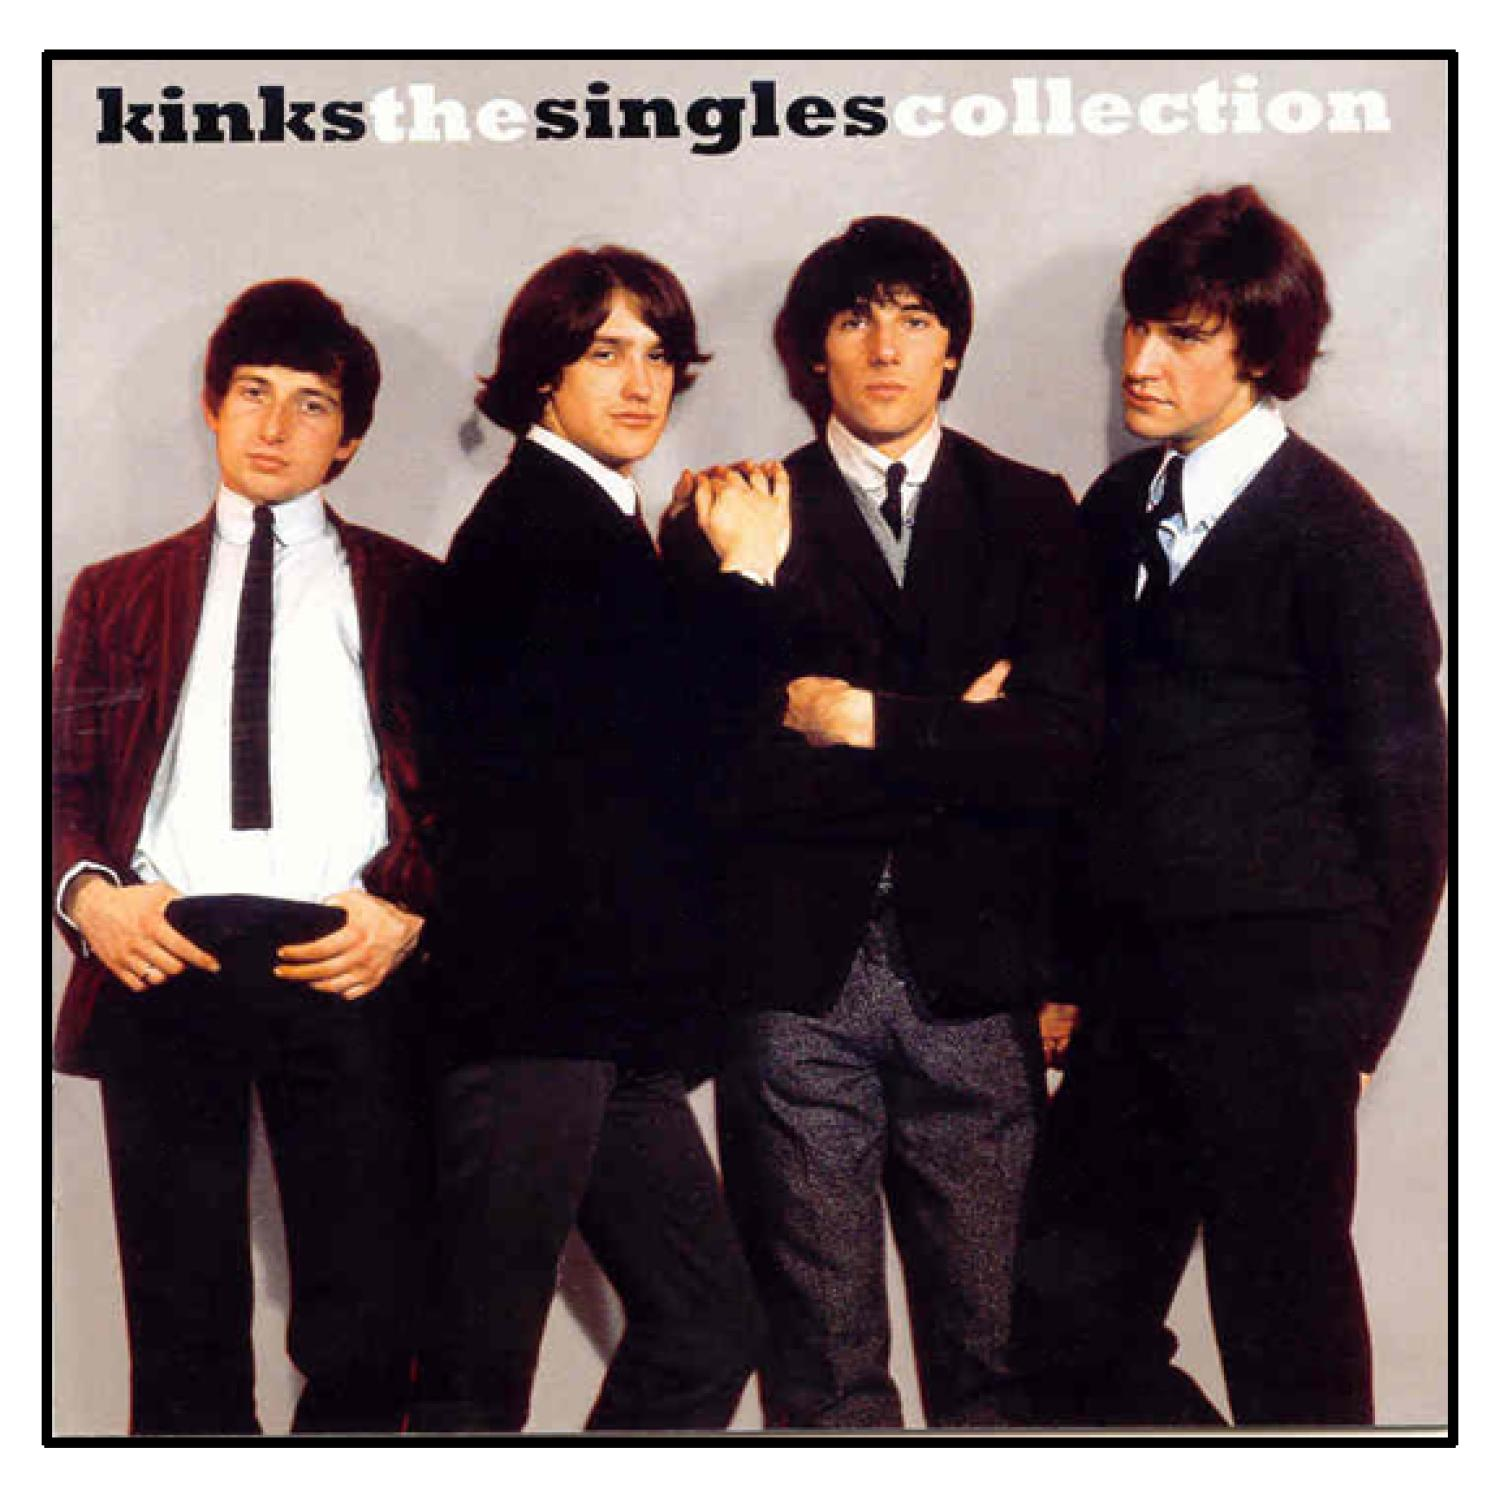 The Kinks - THE SINGLES - (CD) COLLECTION